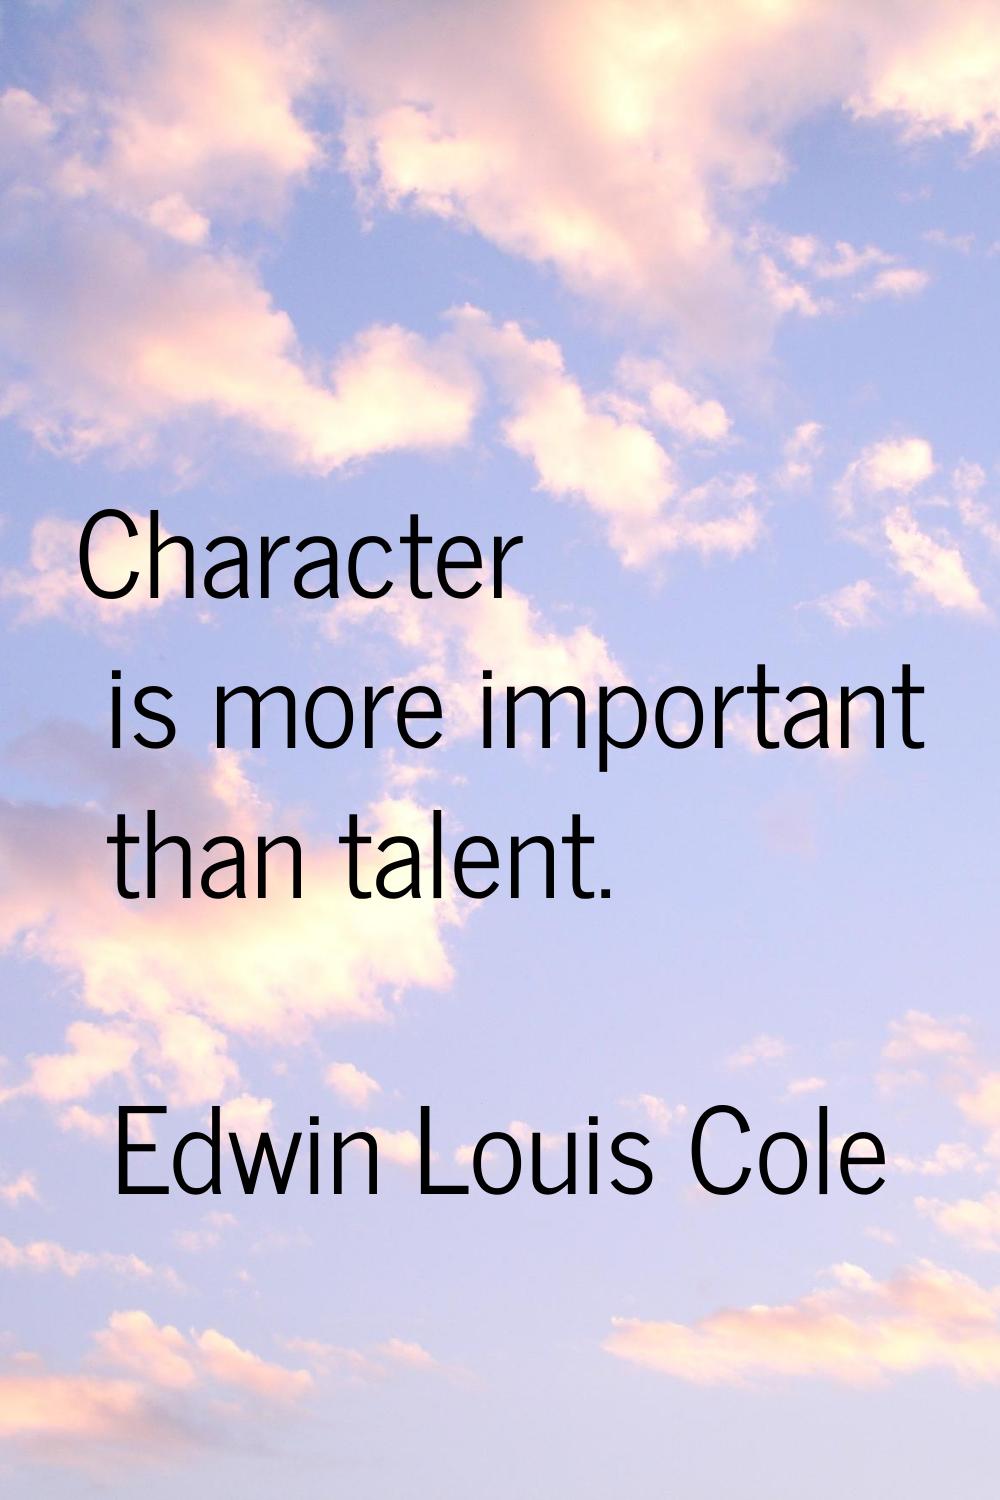 Character is more important than talent.